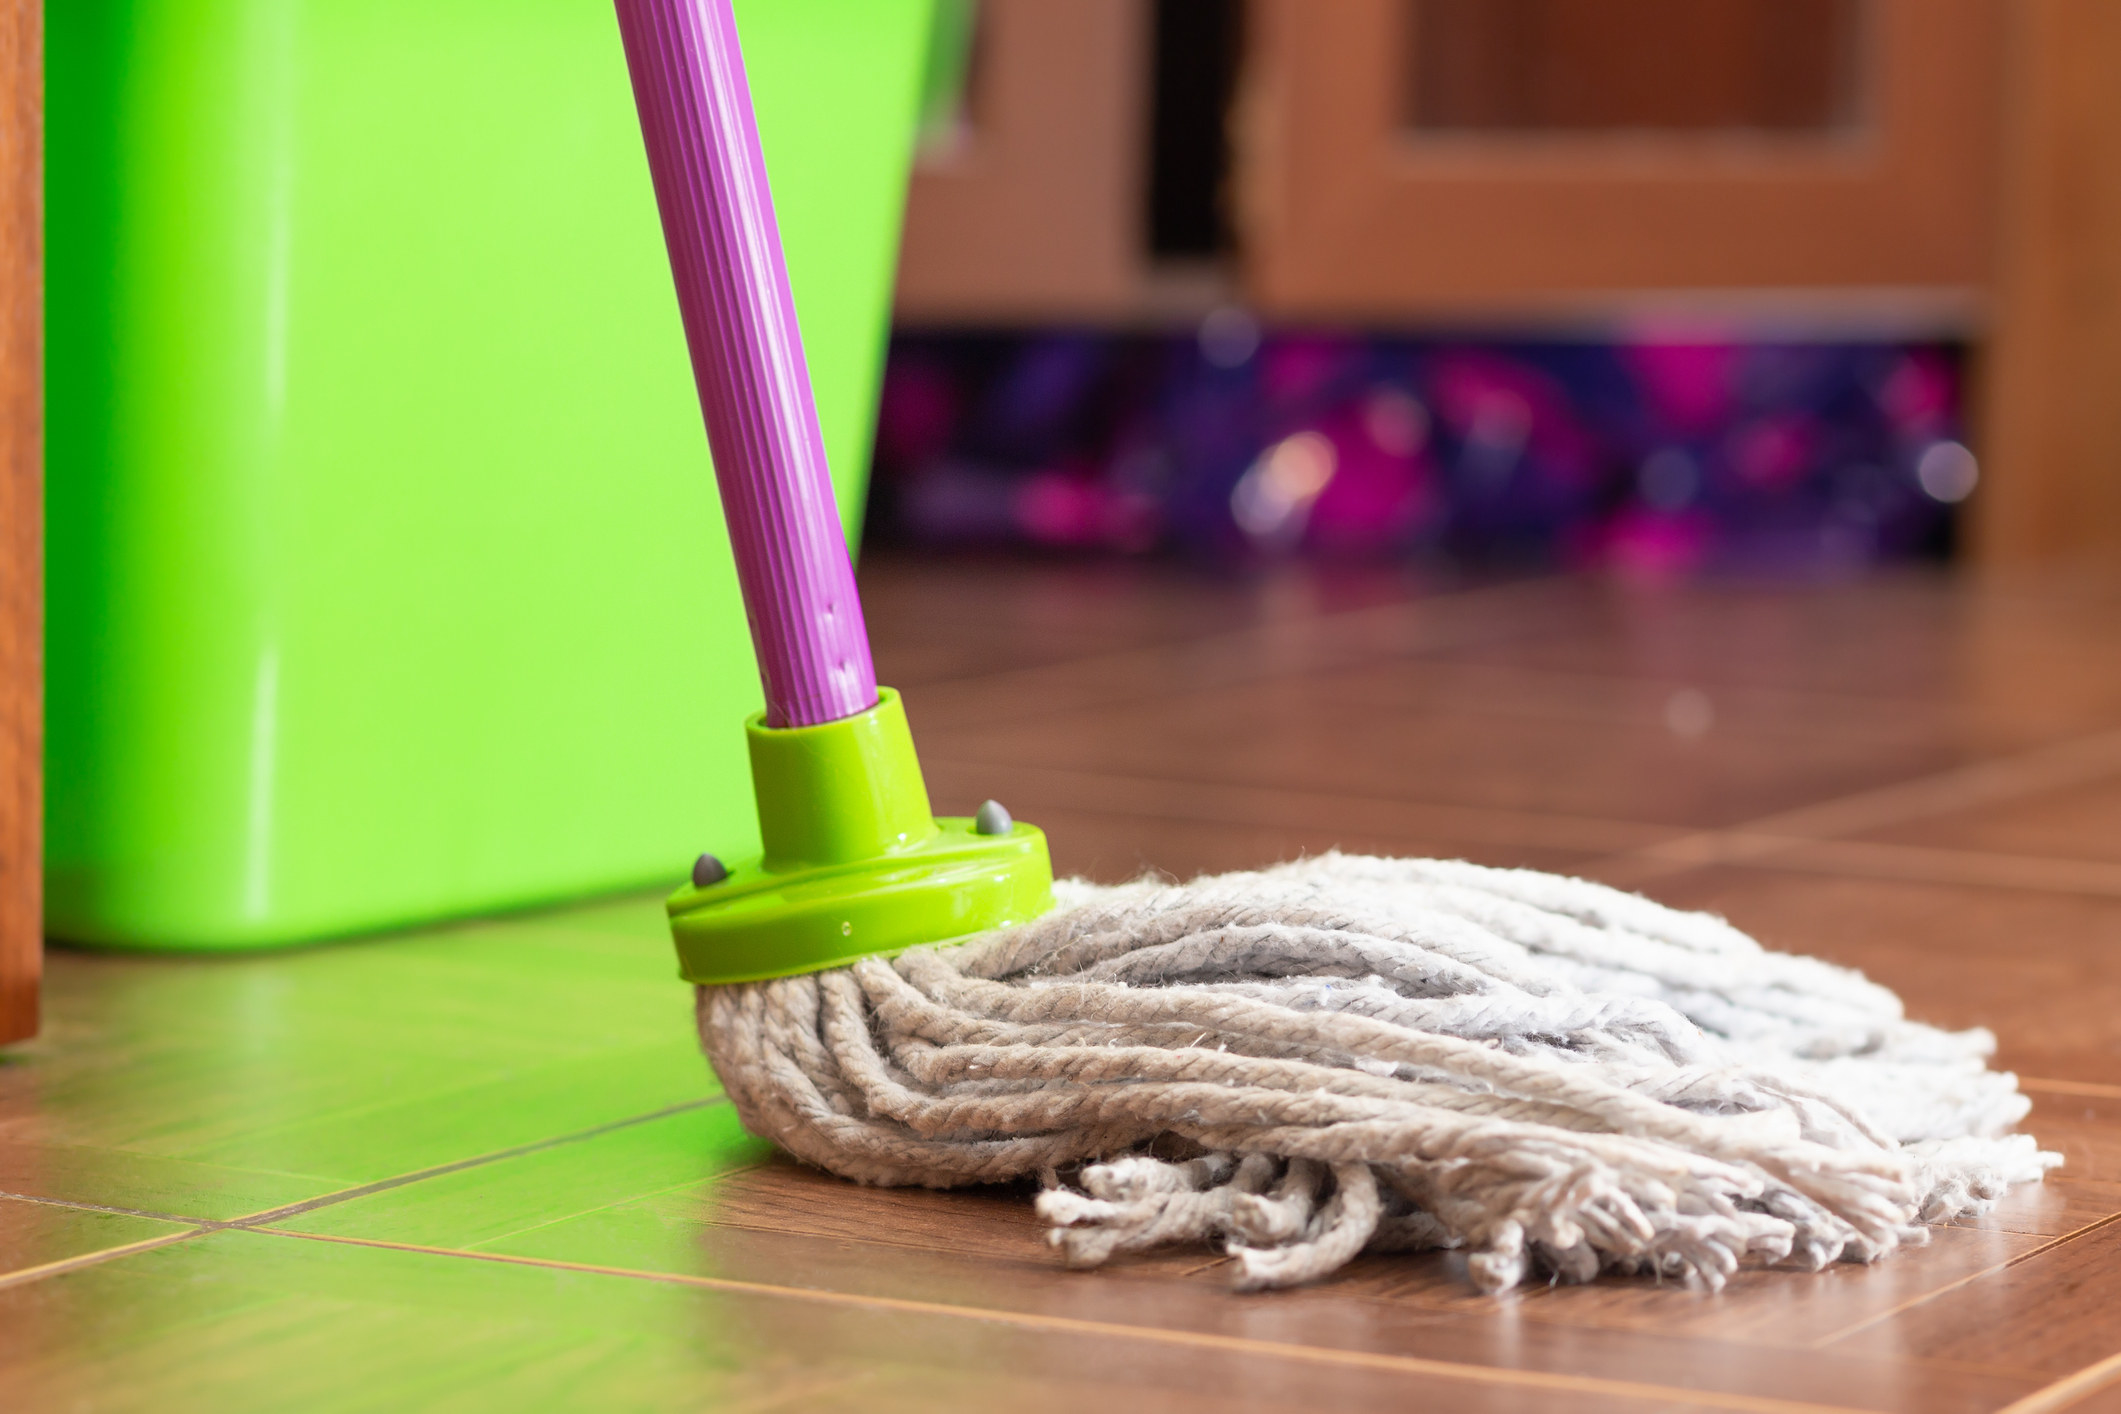 11 Simple Ways To Clean Your Home This Spring That Won’t Break Your Budget